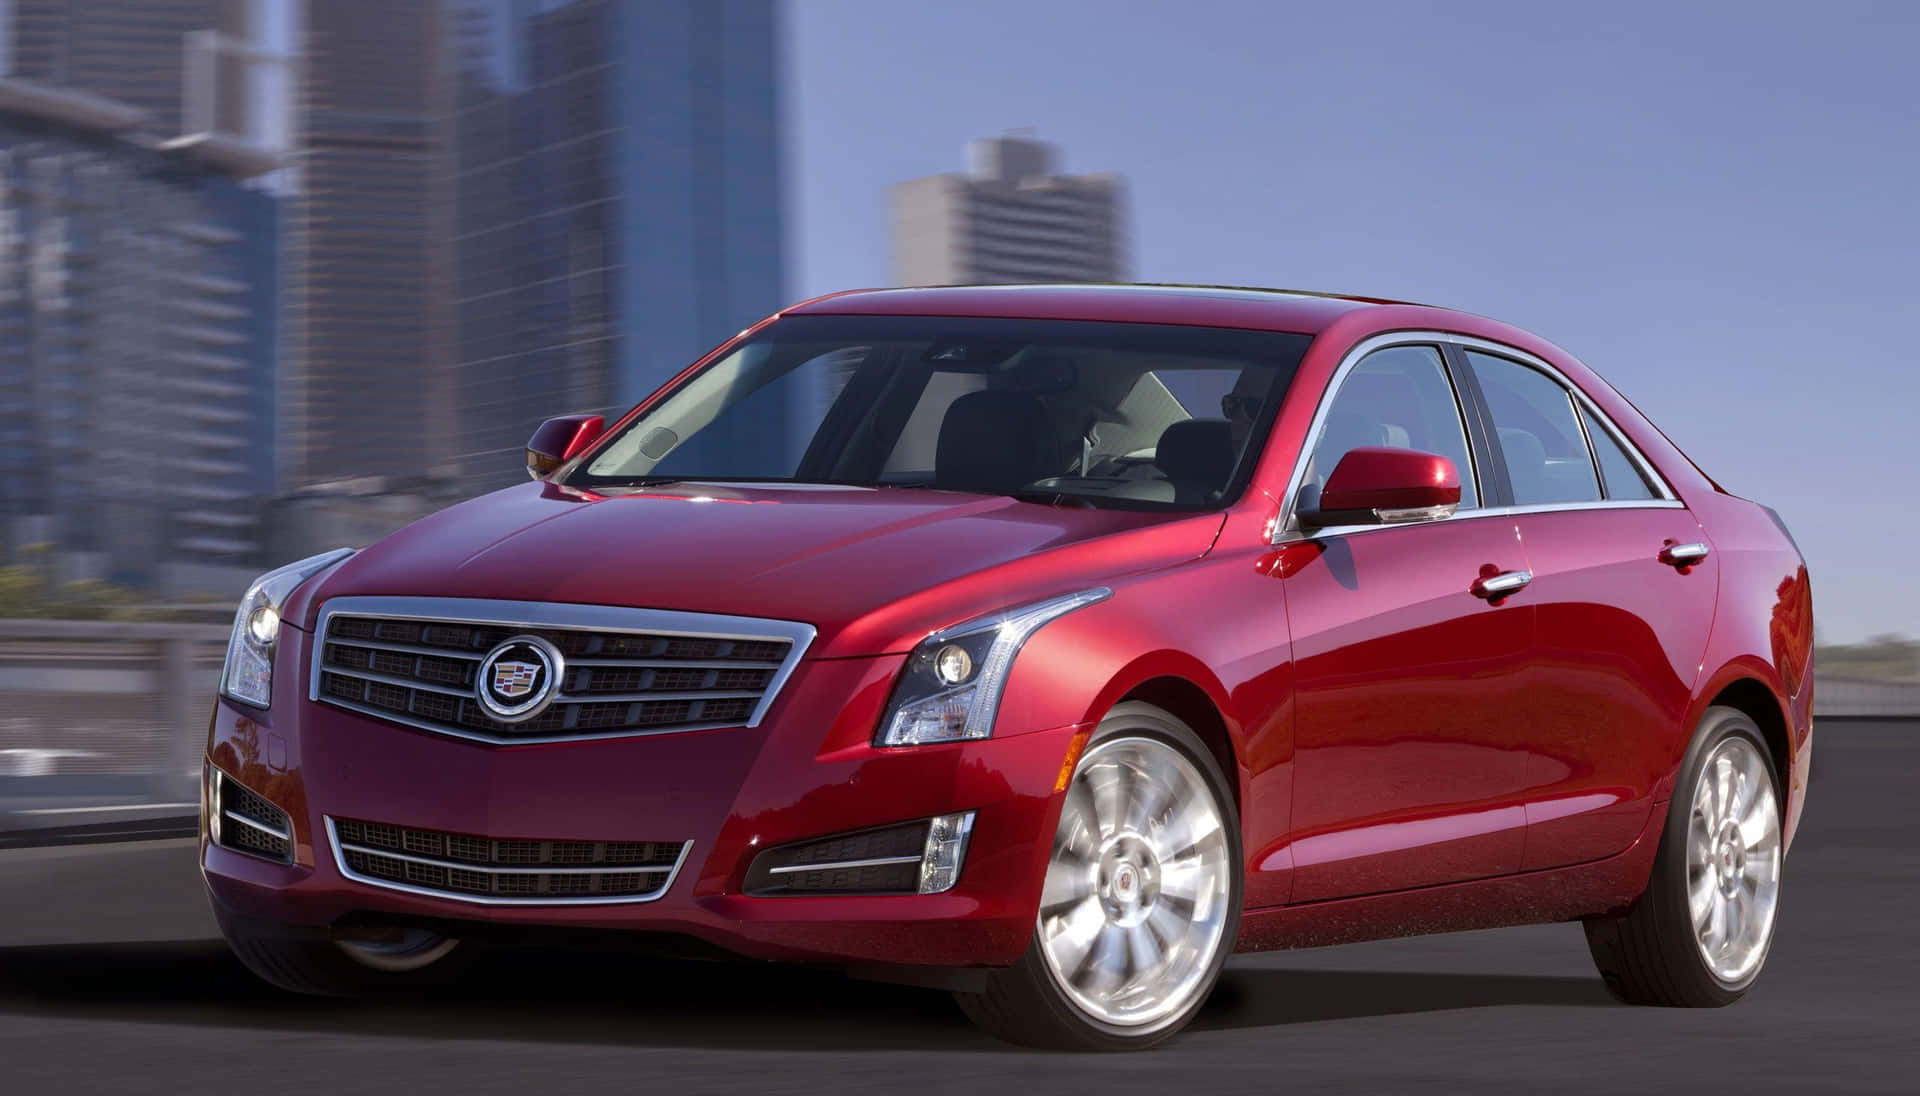 The Red Cadillac Ats Is Driving Down The Road